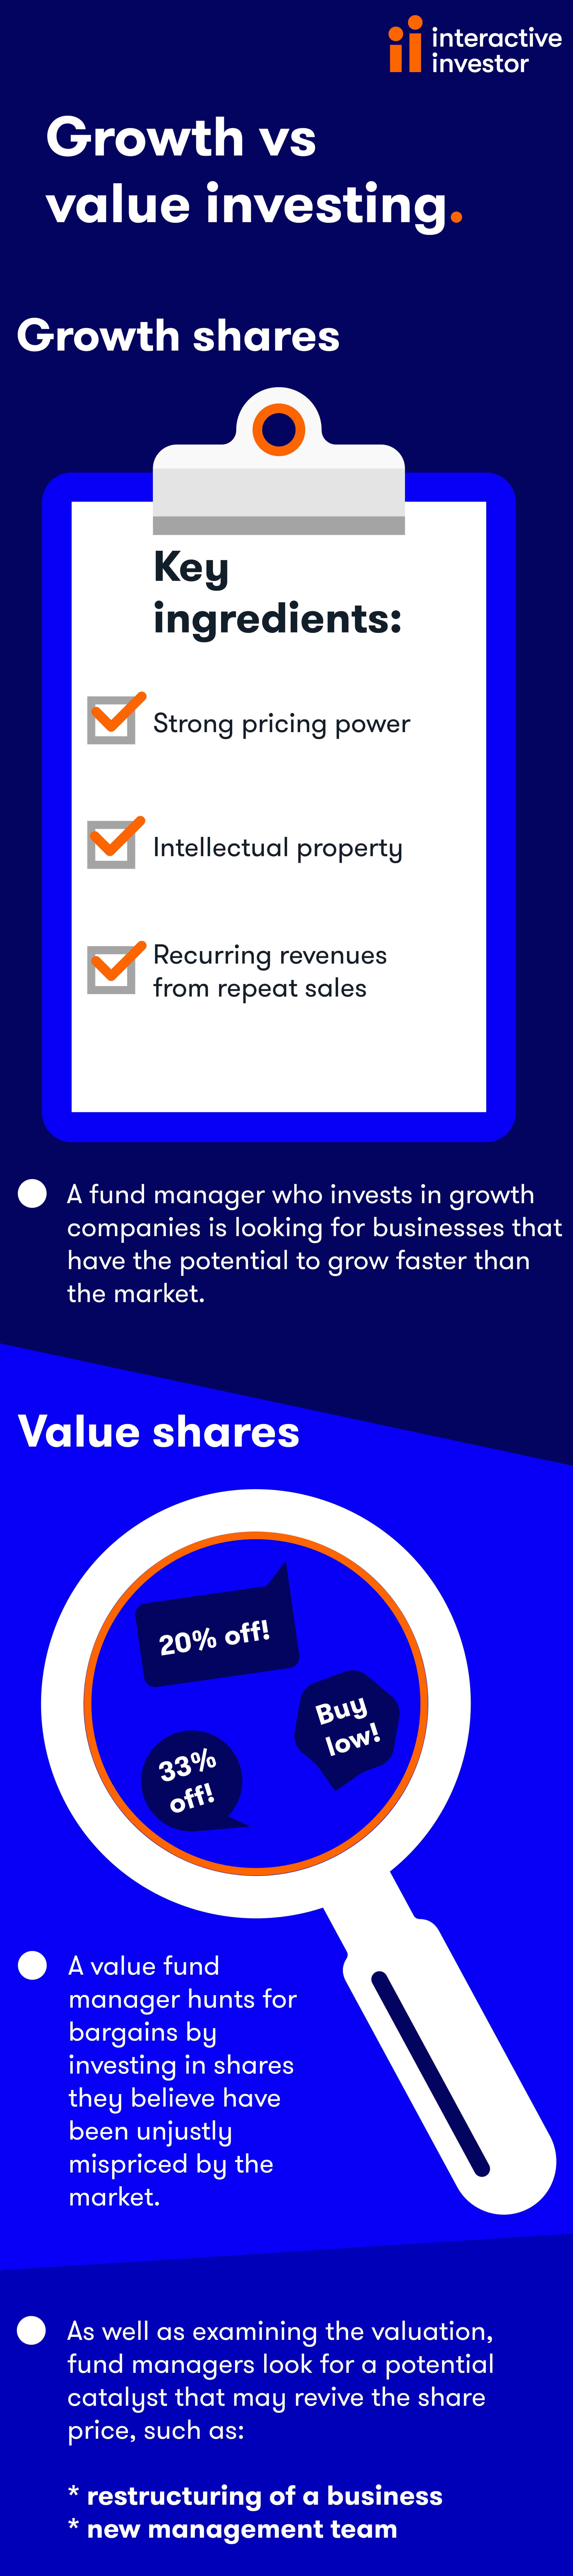 Growth vs value investing infographic